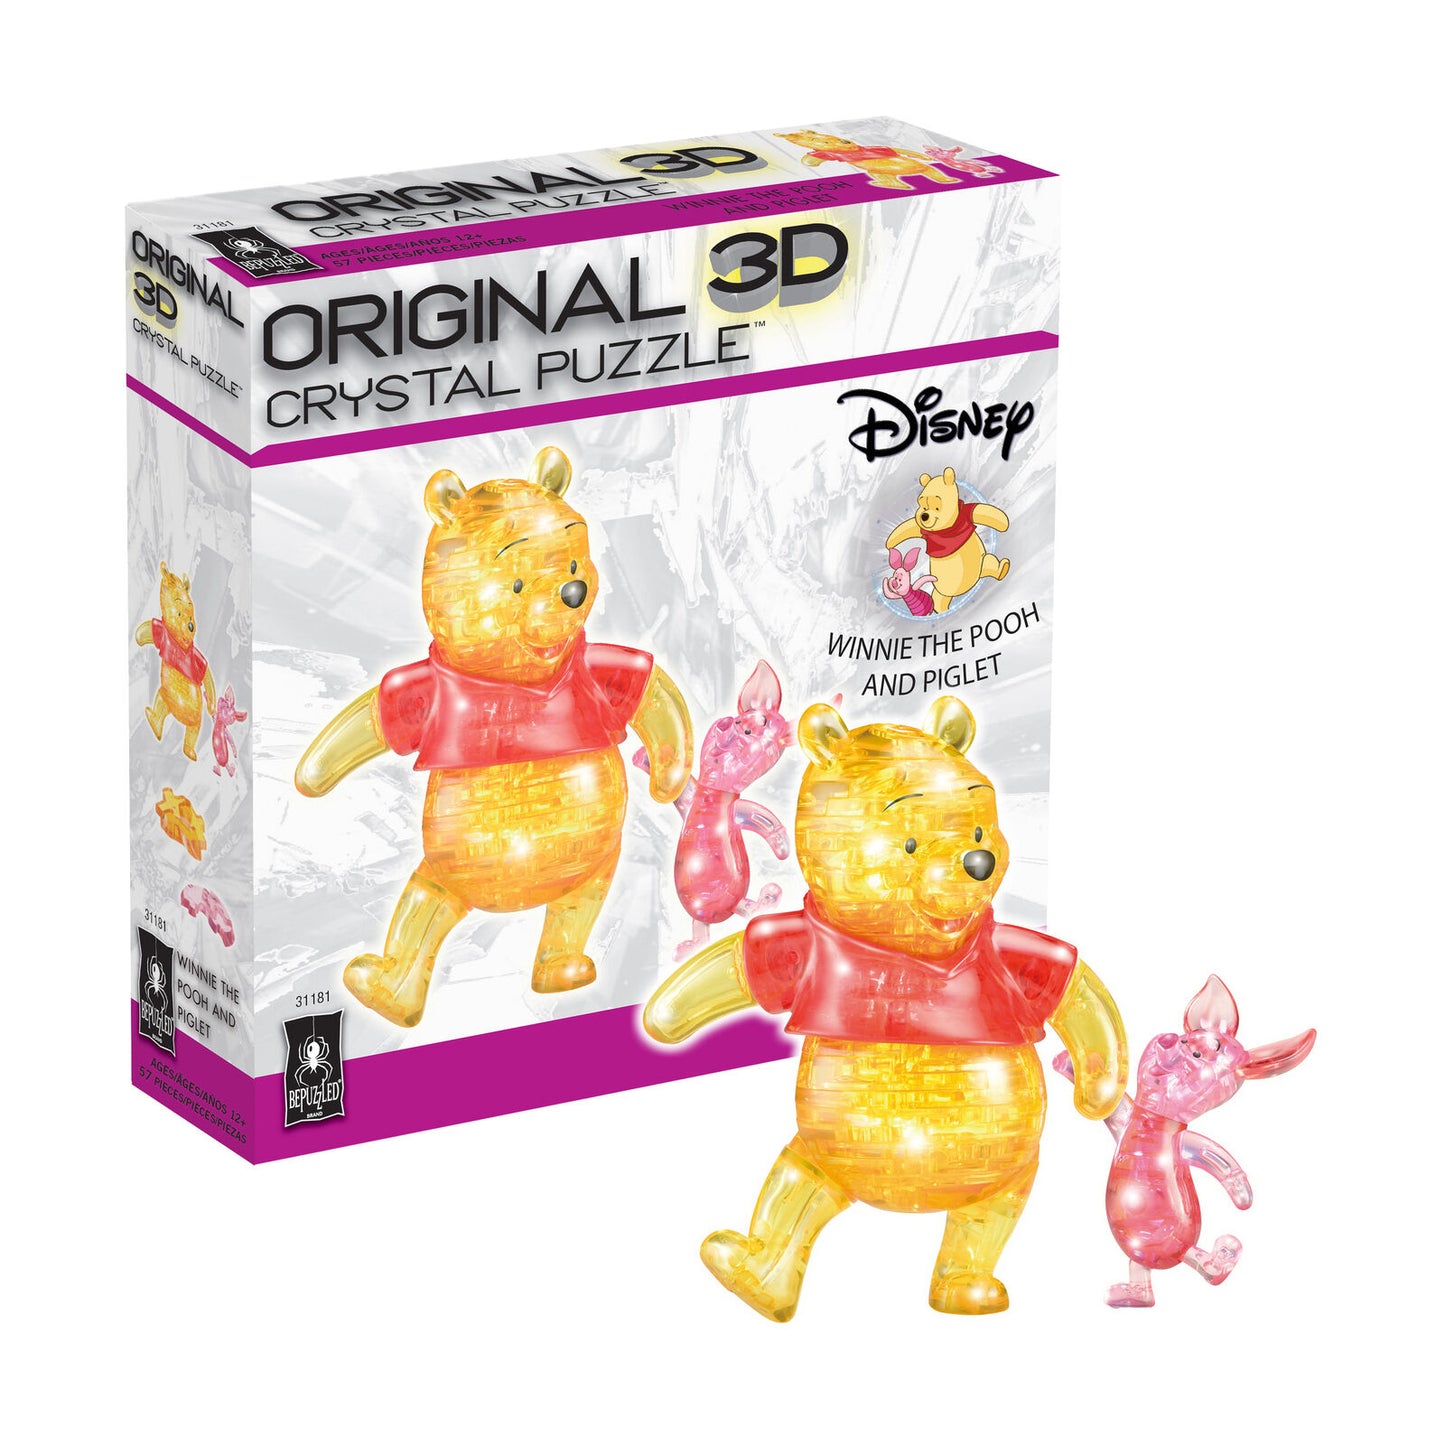 3D Crystal Puzzle Winnie the Pooh & Piglet